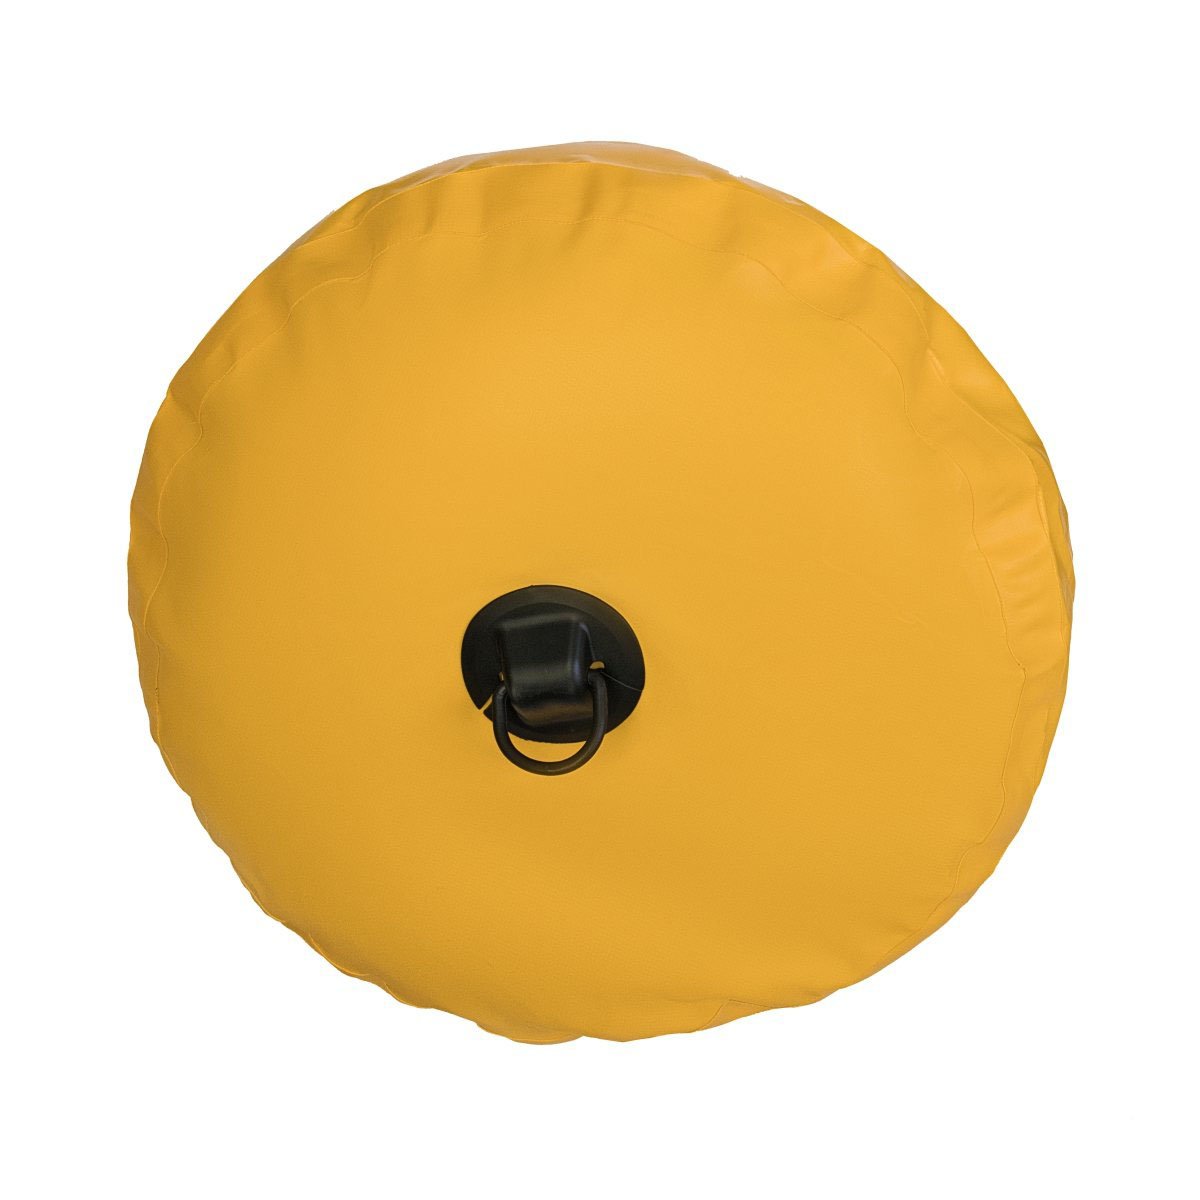 160 L Waterproof Extra Large Dry Bag, Yellow, Bottom View